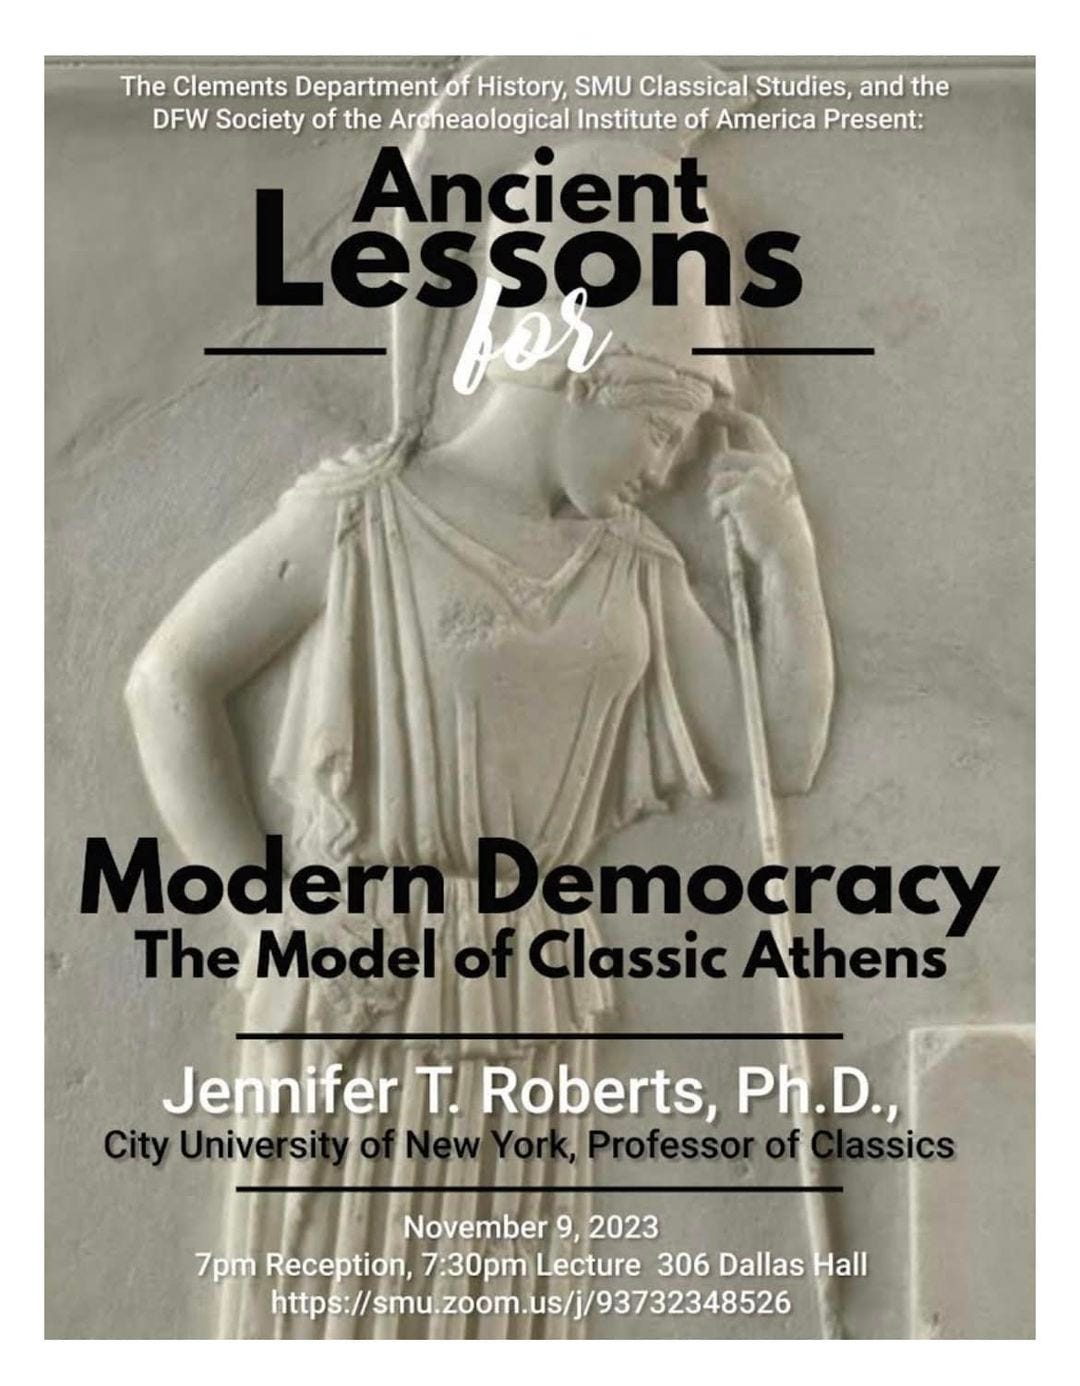 May be an image of 1 person and text that says 'The Clements Department History, SMU Classical Studies, and the DFW Society of the Archeaological Institute of America Present: Lessons sons Ancient for Modern emocracy The Modelof Classic Athens Jennifer T. Roberts, Ph.D., City Unive Û Classic November 2023 7pm Reception, 7:30pm Lecture 306 Dallas Hall https://smu.om.us/93732348526'